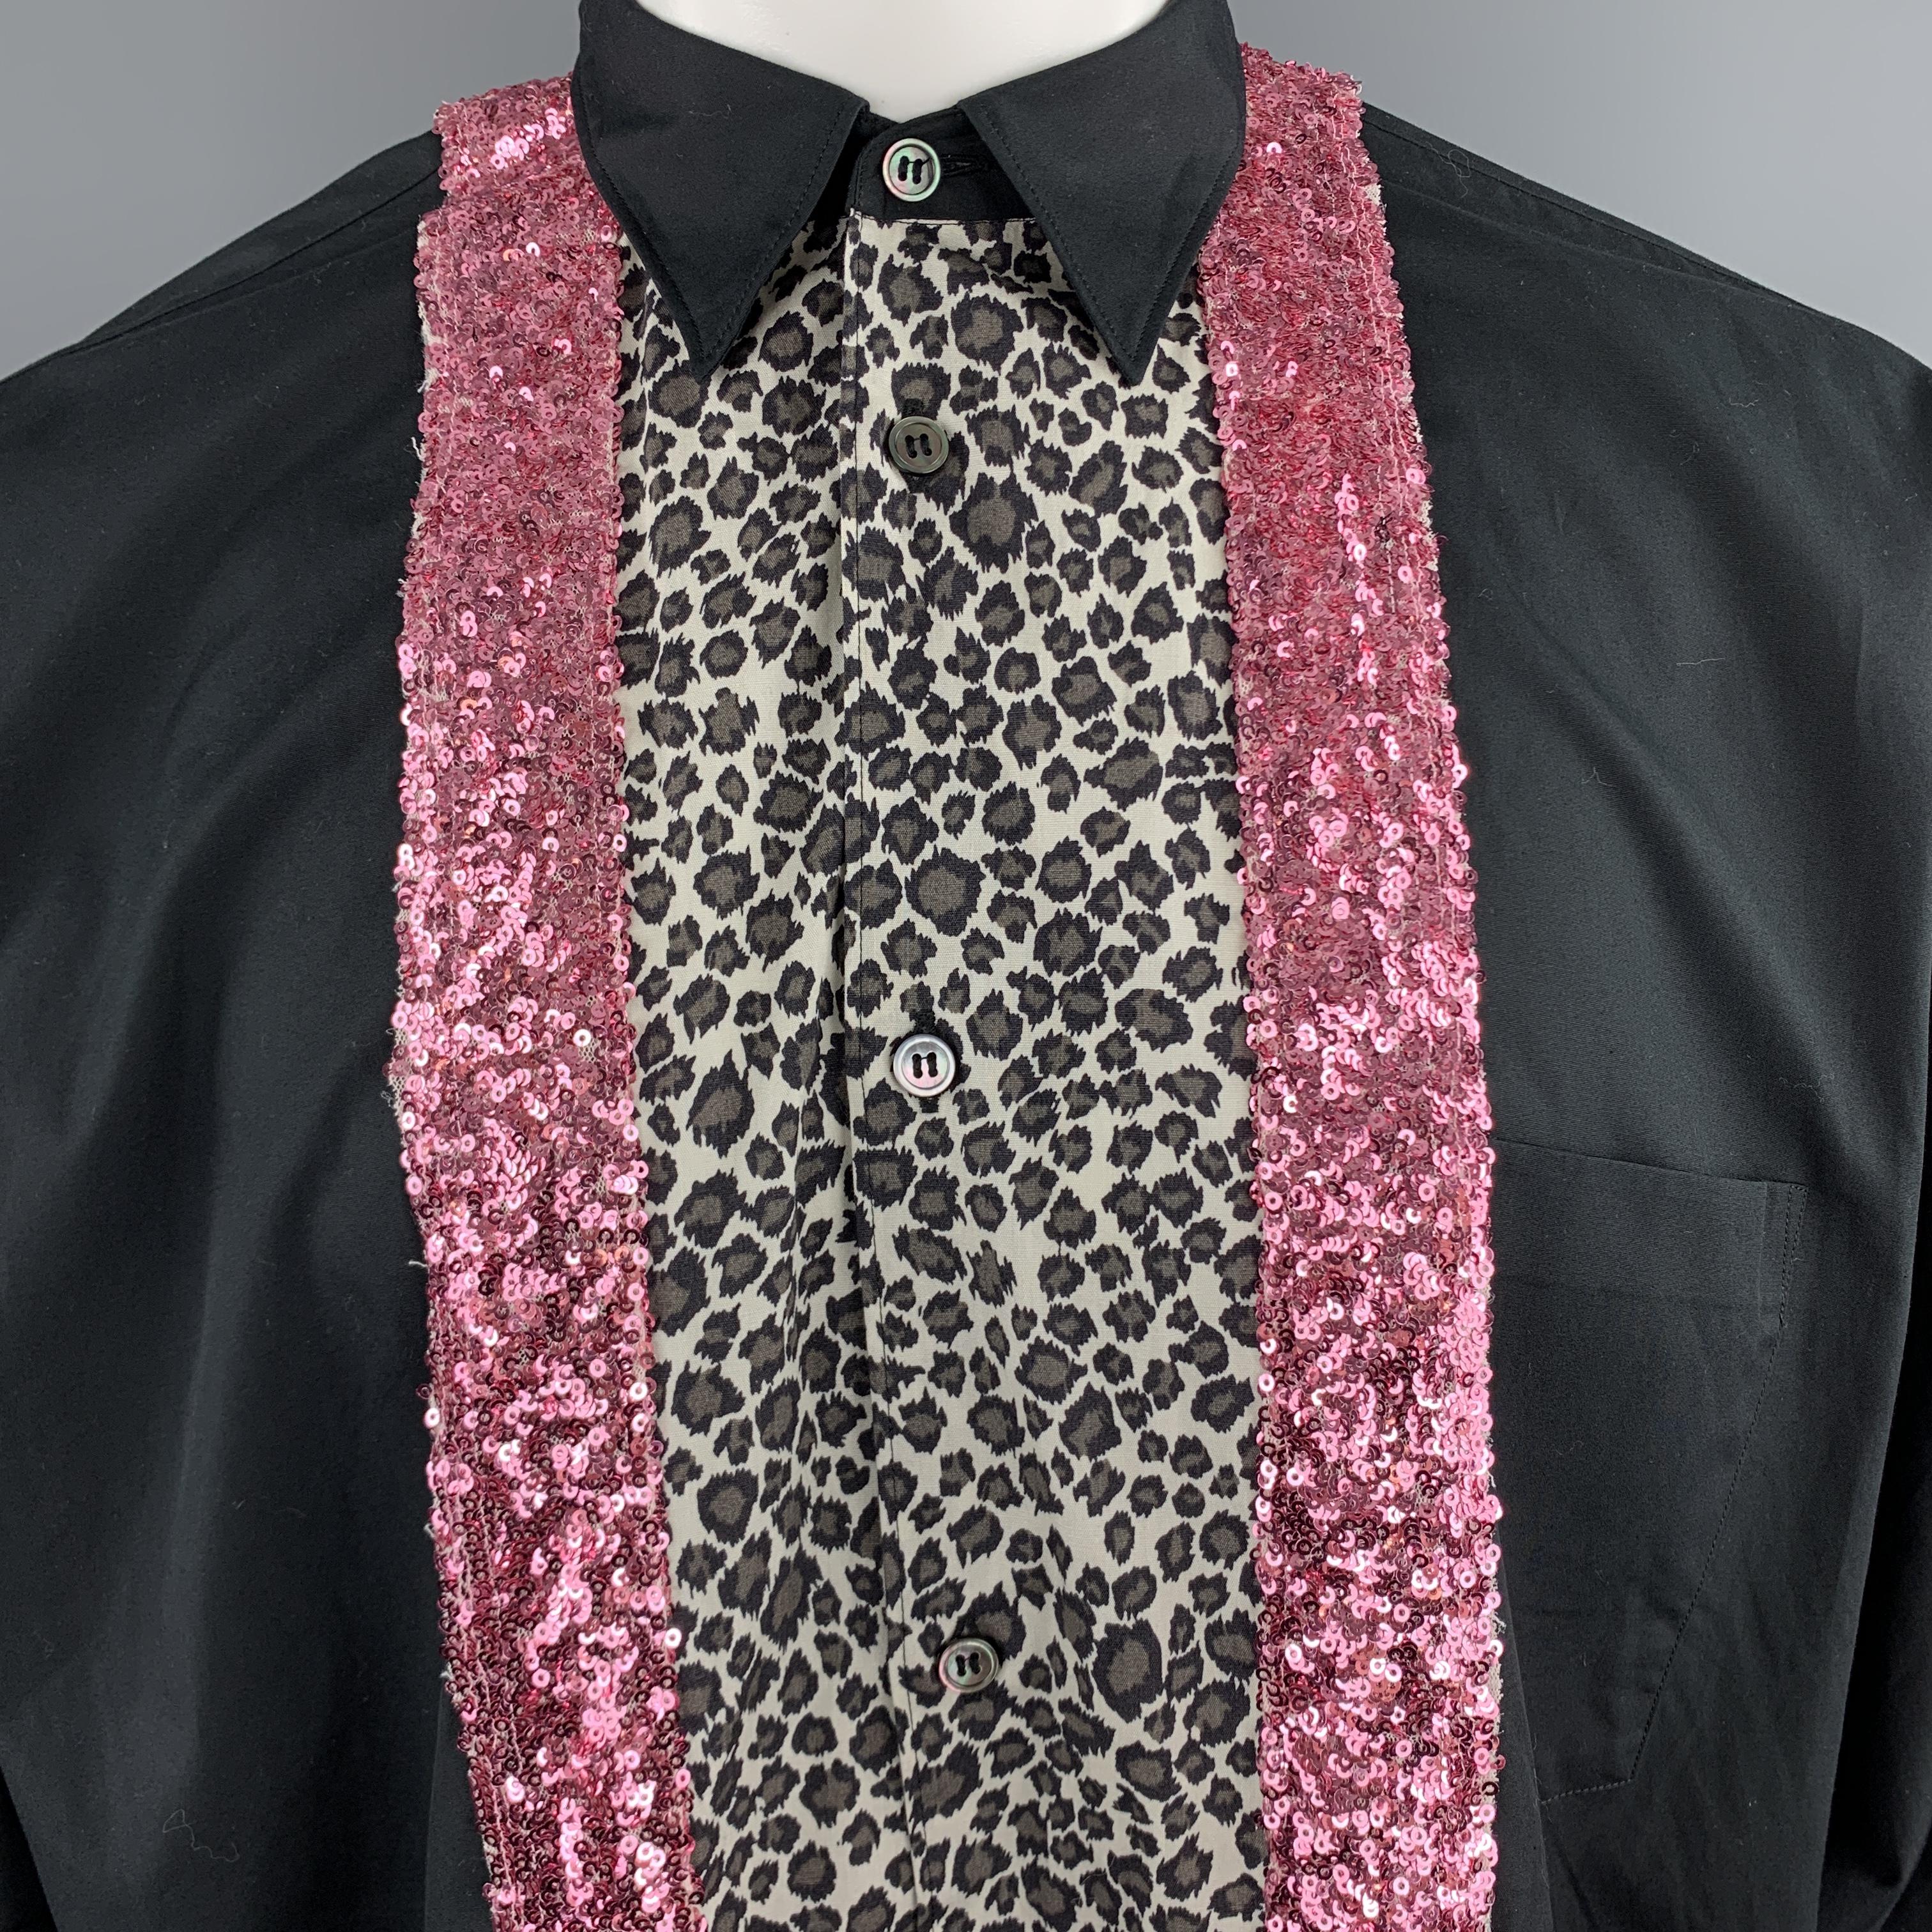 COMME des GARCONS HOMME PLUS shirt comes in black cotton with a pointed collar, oversized fit, patch breast pocket, and leopard and pink sequined patchwork stripes. Made in Japan.

Excellent Pre-Owned Condition.
Marked: S